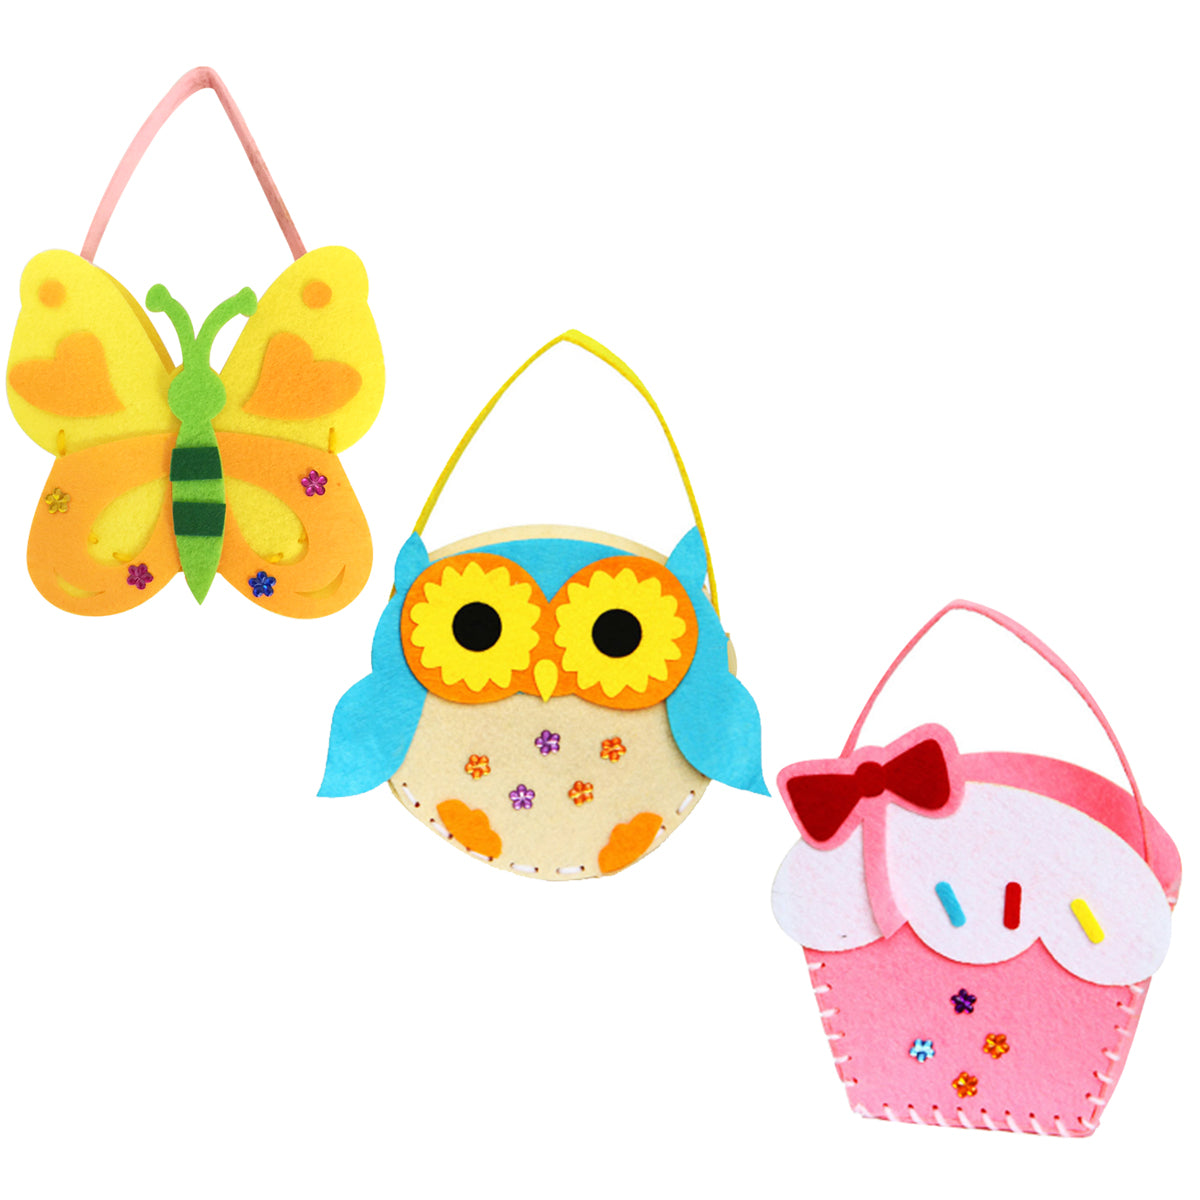 Wrapables DIY Novelty Party Purse (Set of 3), Butterfly, Cupcake, Owl